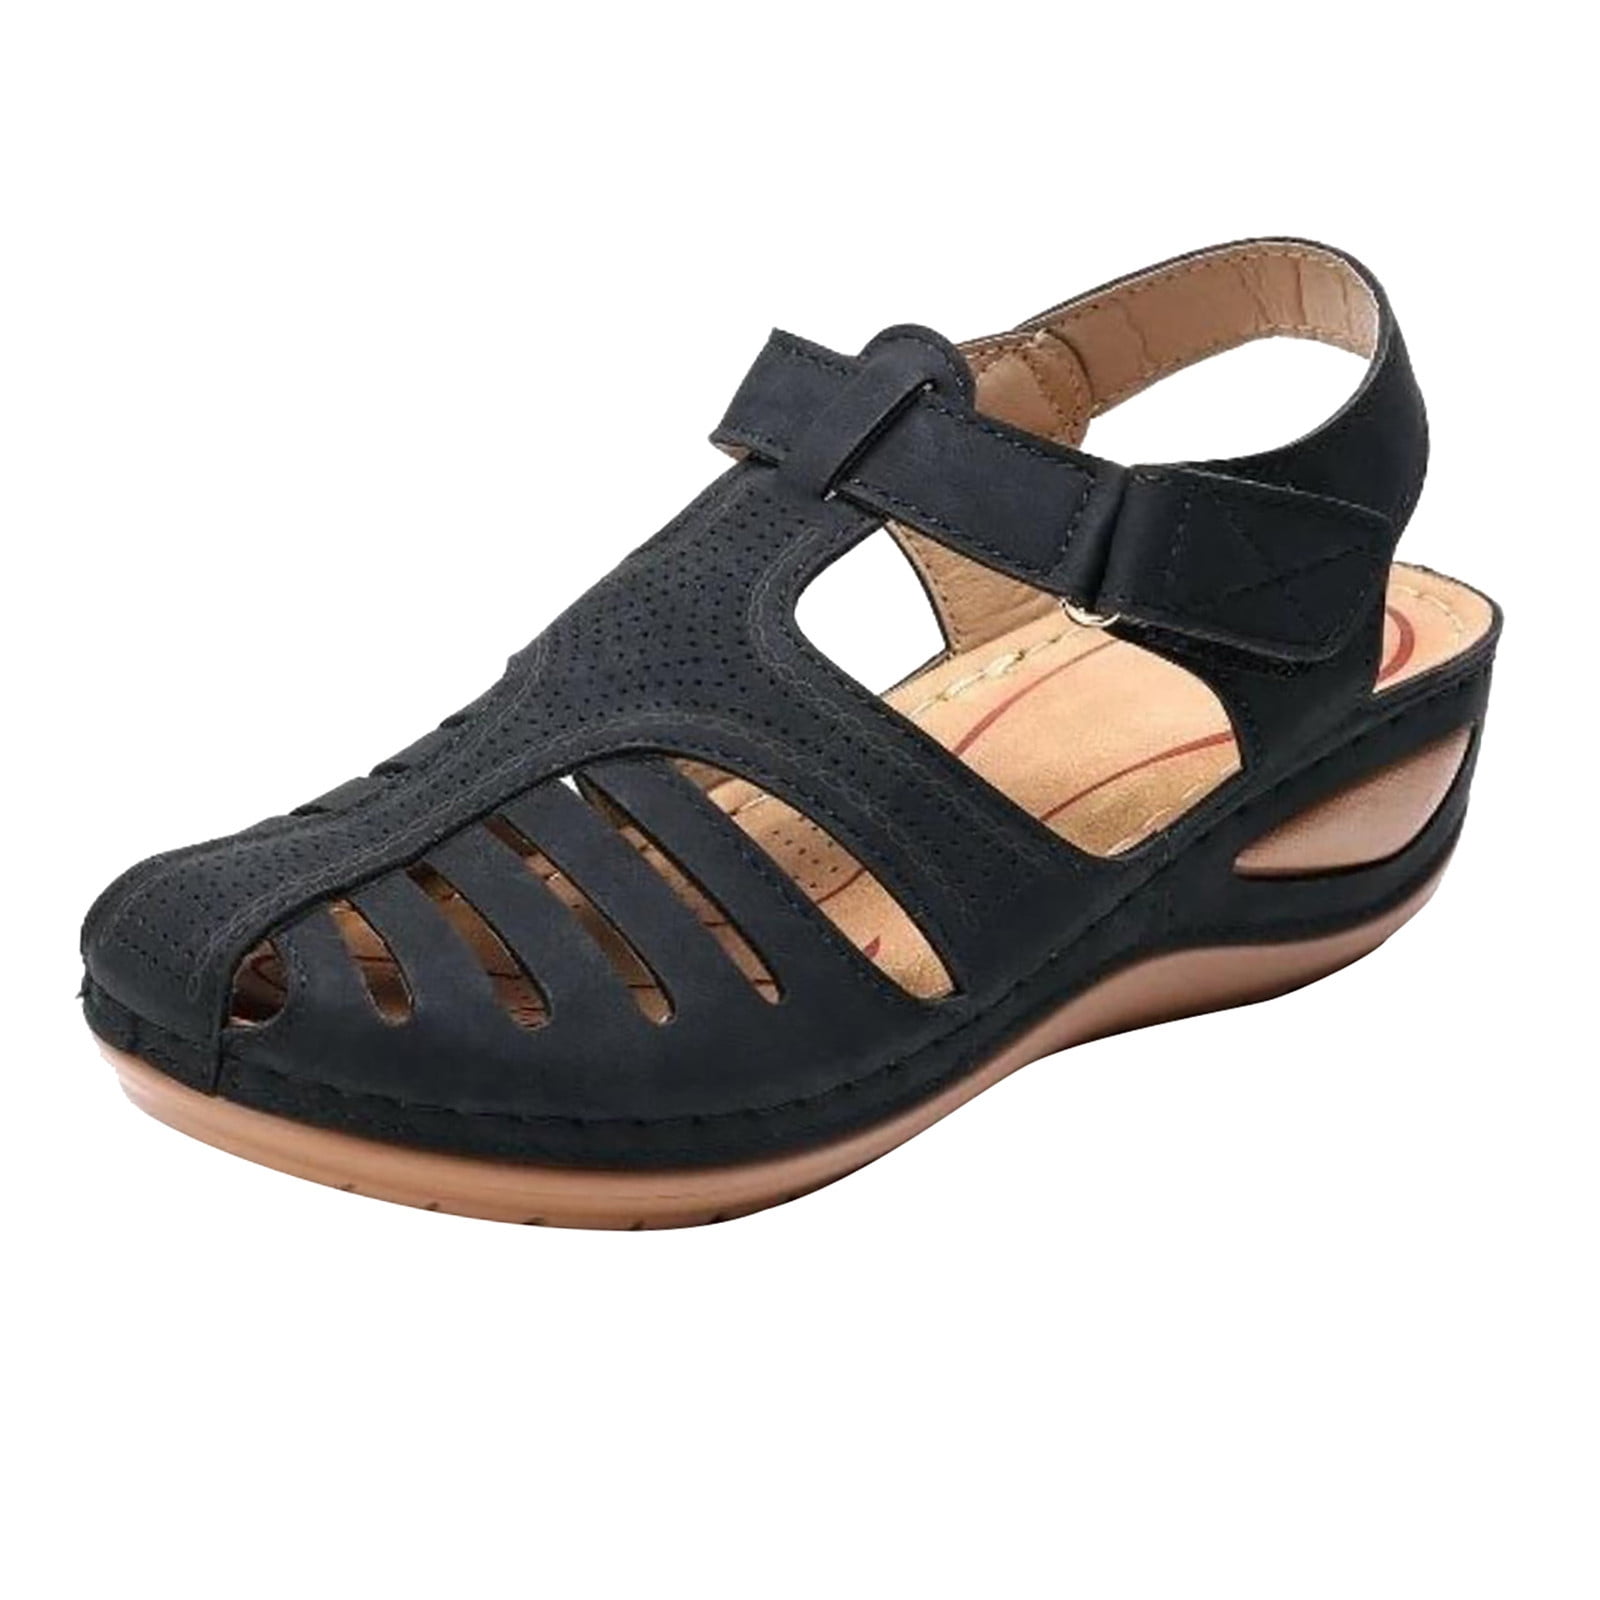 Womens Wedges Fisherman Sandals,Nevera Summer Comfy Ankle Strap Hollow Shoes Causal Wide Fit Sandal Outdoor Shoes 